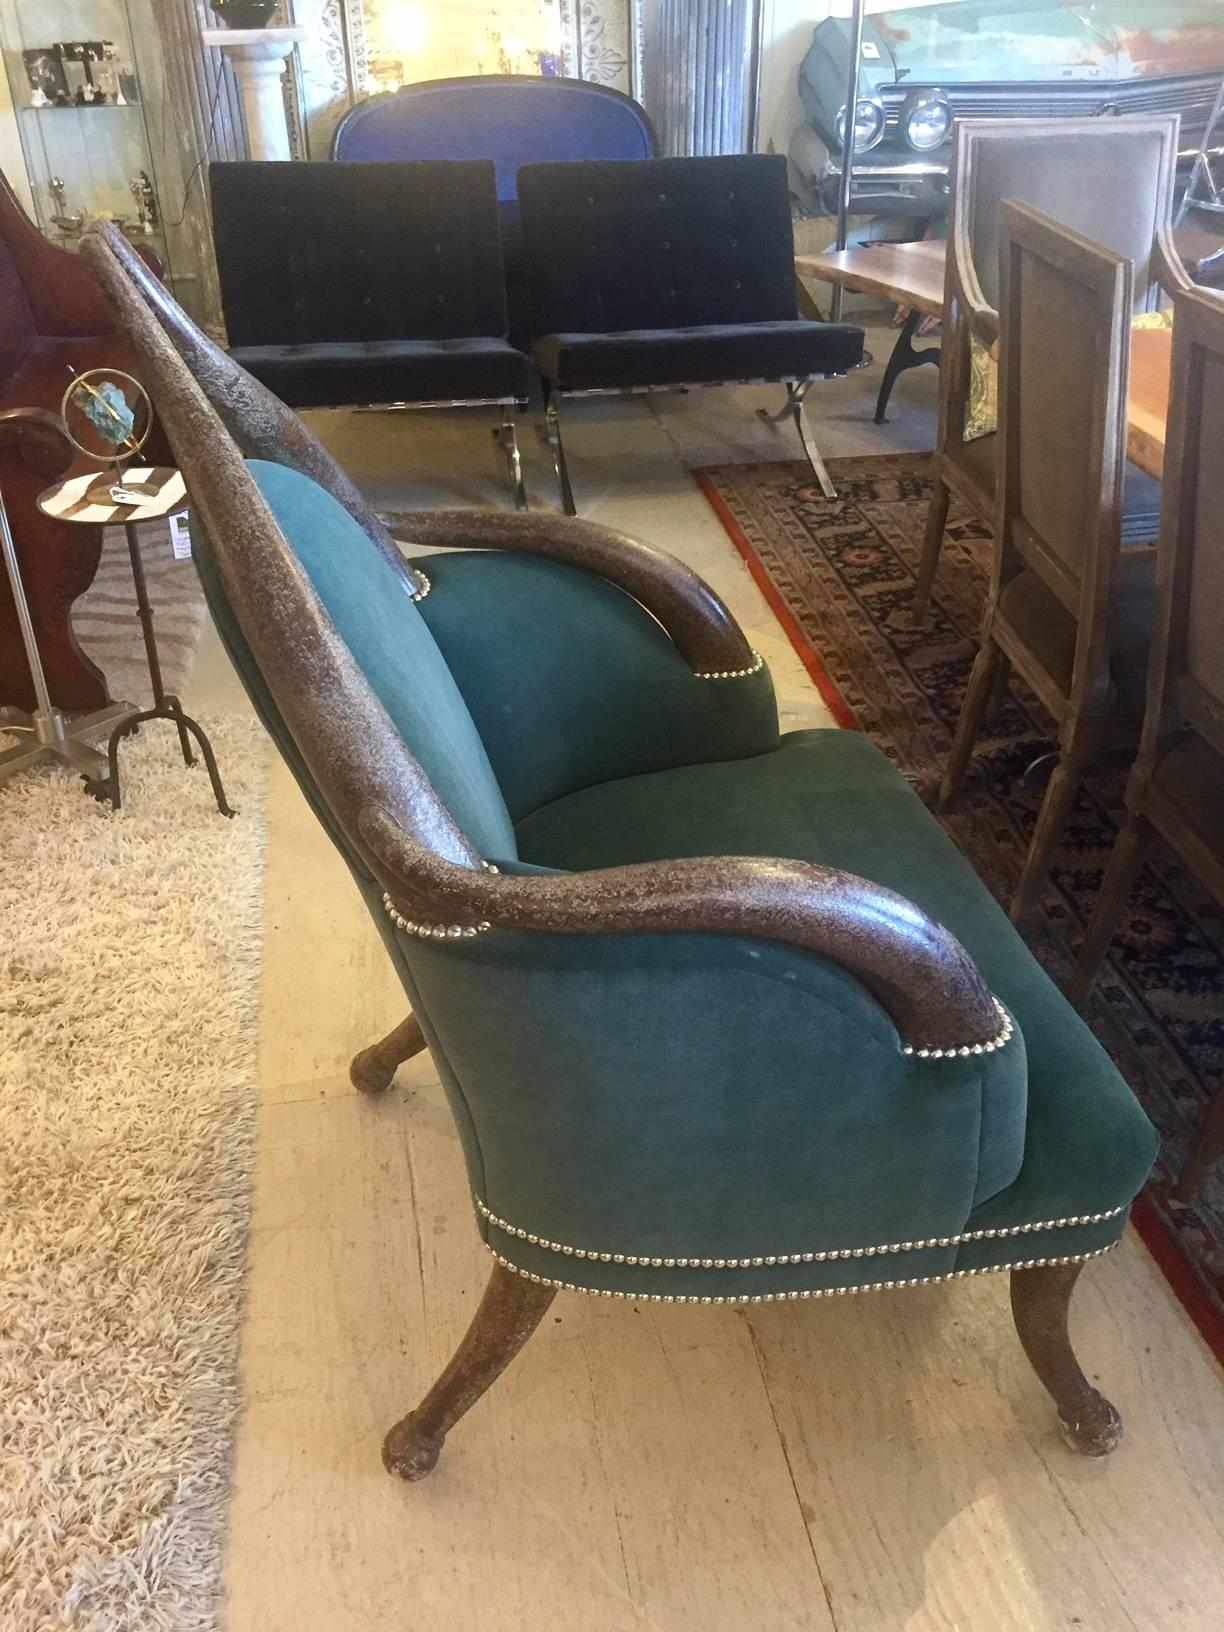 The chair that steals the show in the room, a striking faux Horn armchair upholstered in rich teal velvet with a shagreen pattern, finished with brass nailheads.